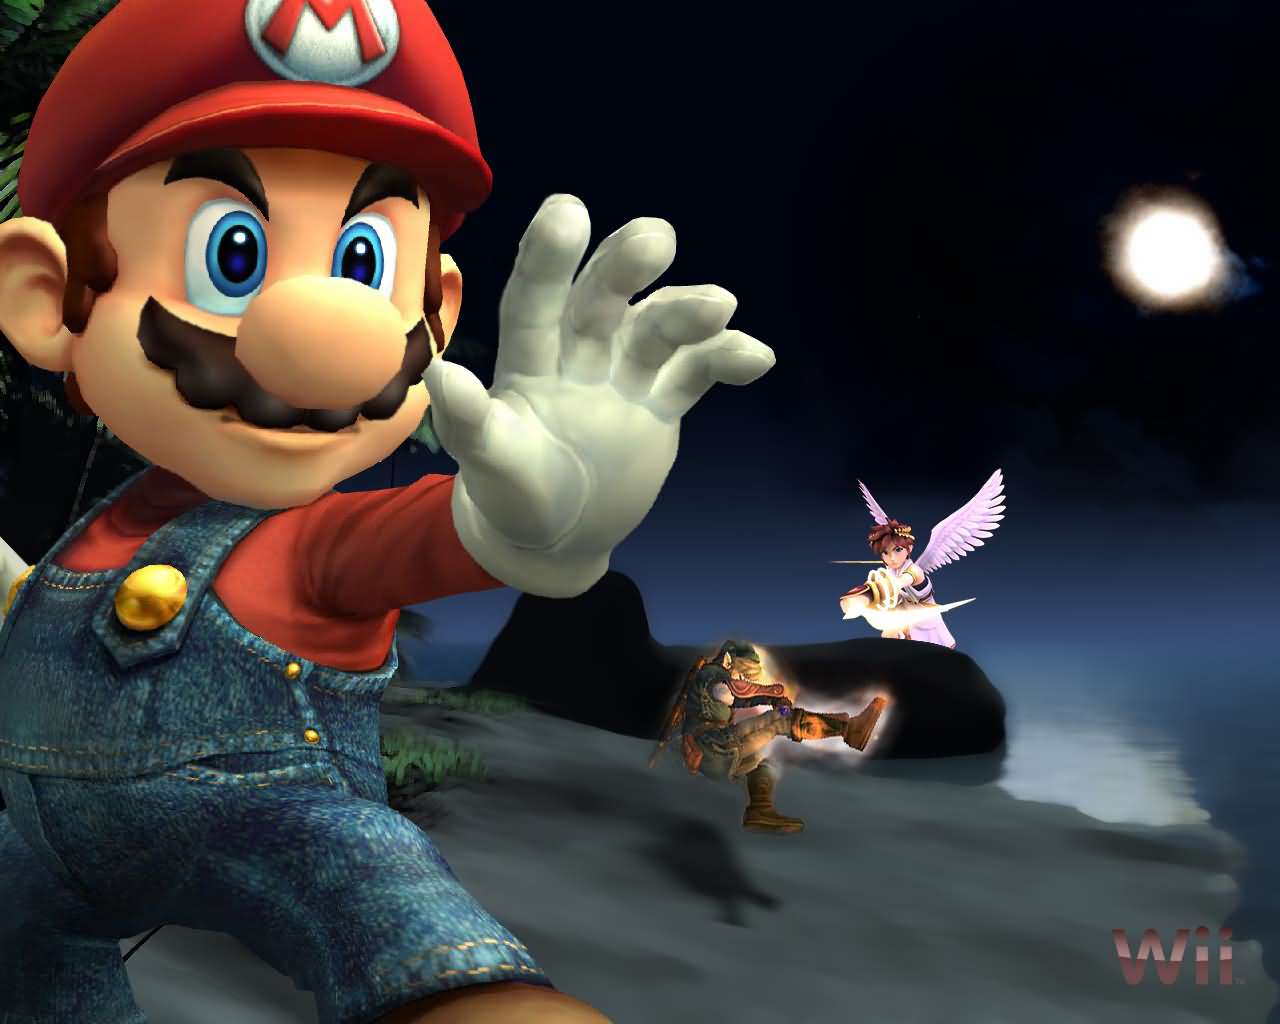 This Mario Super Smash Bros Brawl Wallpaper Was Published By Eraze On